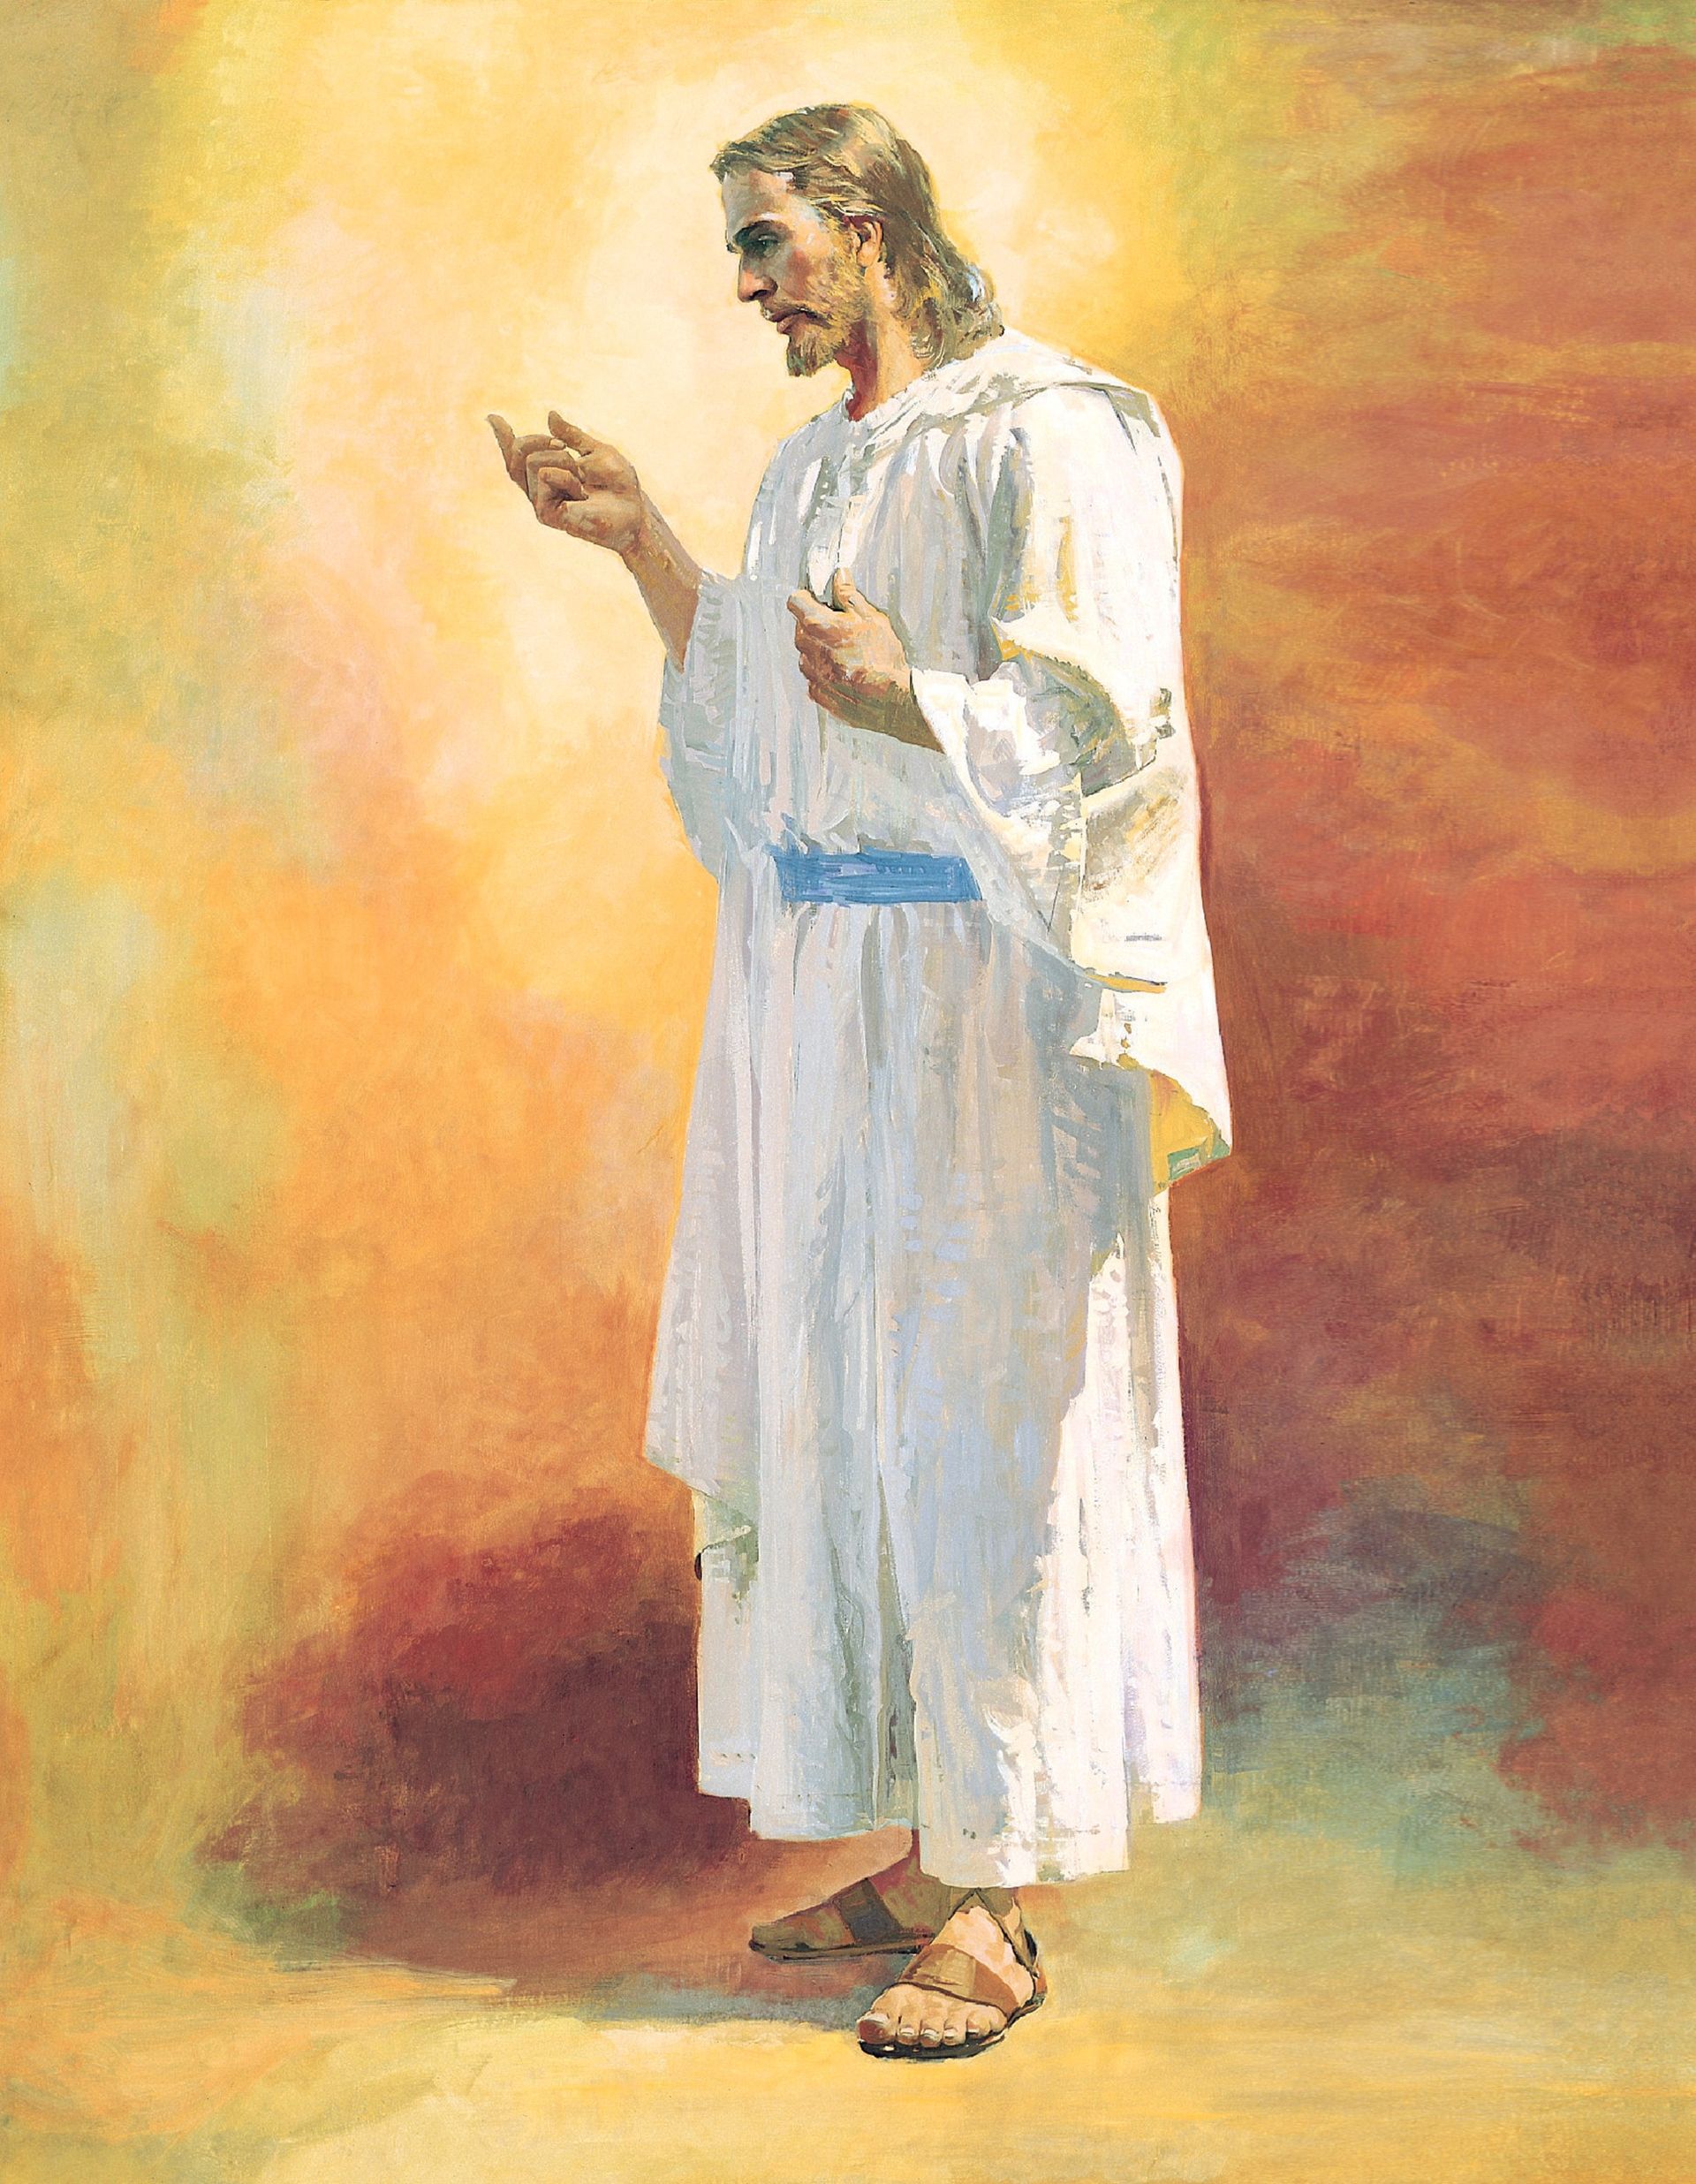 Jesus Christ, by Harry Anderson